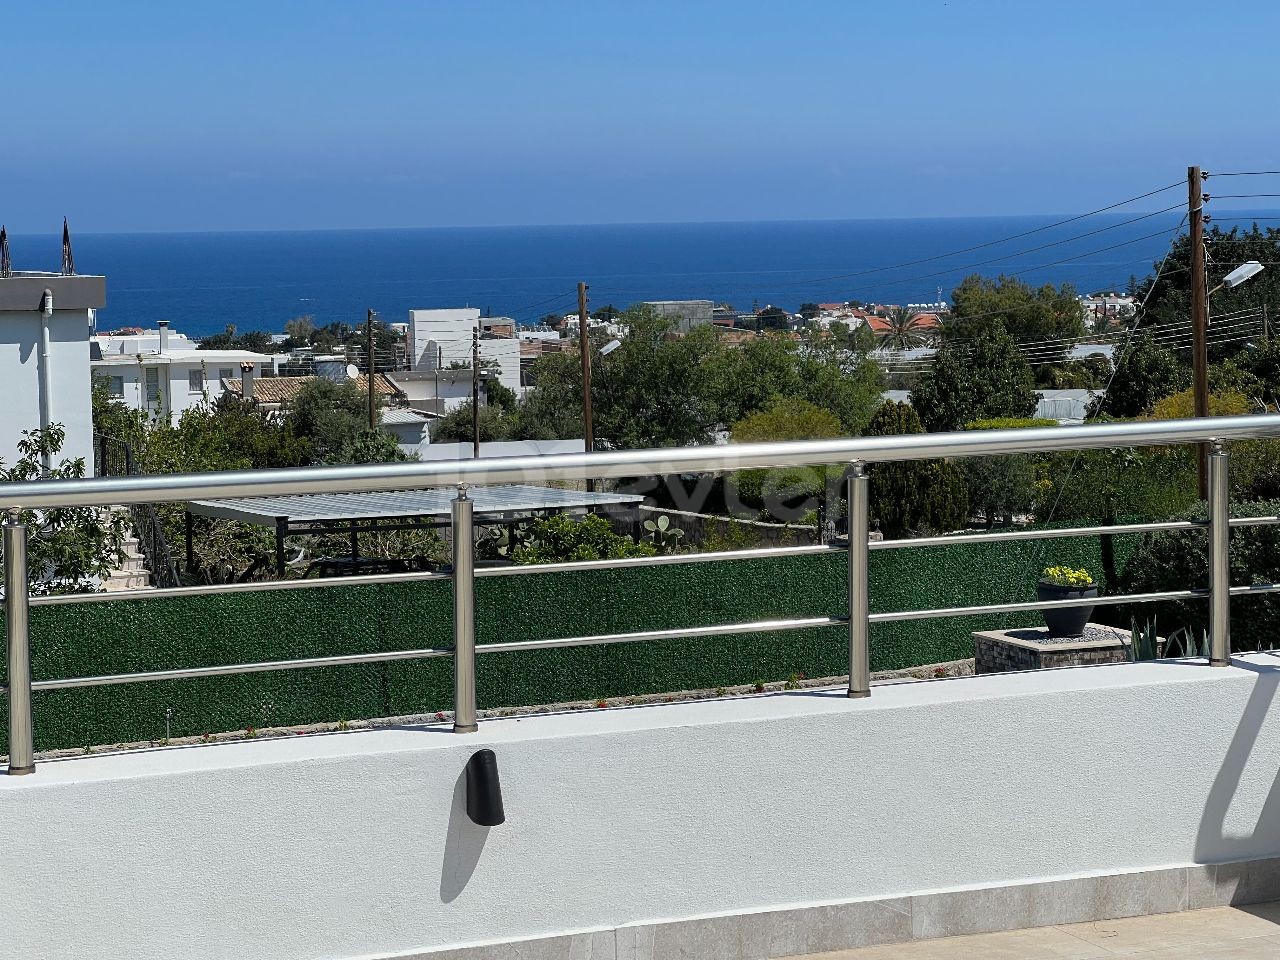 In Kyrenia, Alsancak, there are 2 2+1 and 1+1 auxiliary houses on a 1650m2 land. There is a 14x5 private swimming pool in the complex with a total indoor area of 279m2. 05338403555